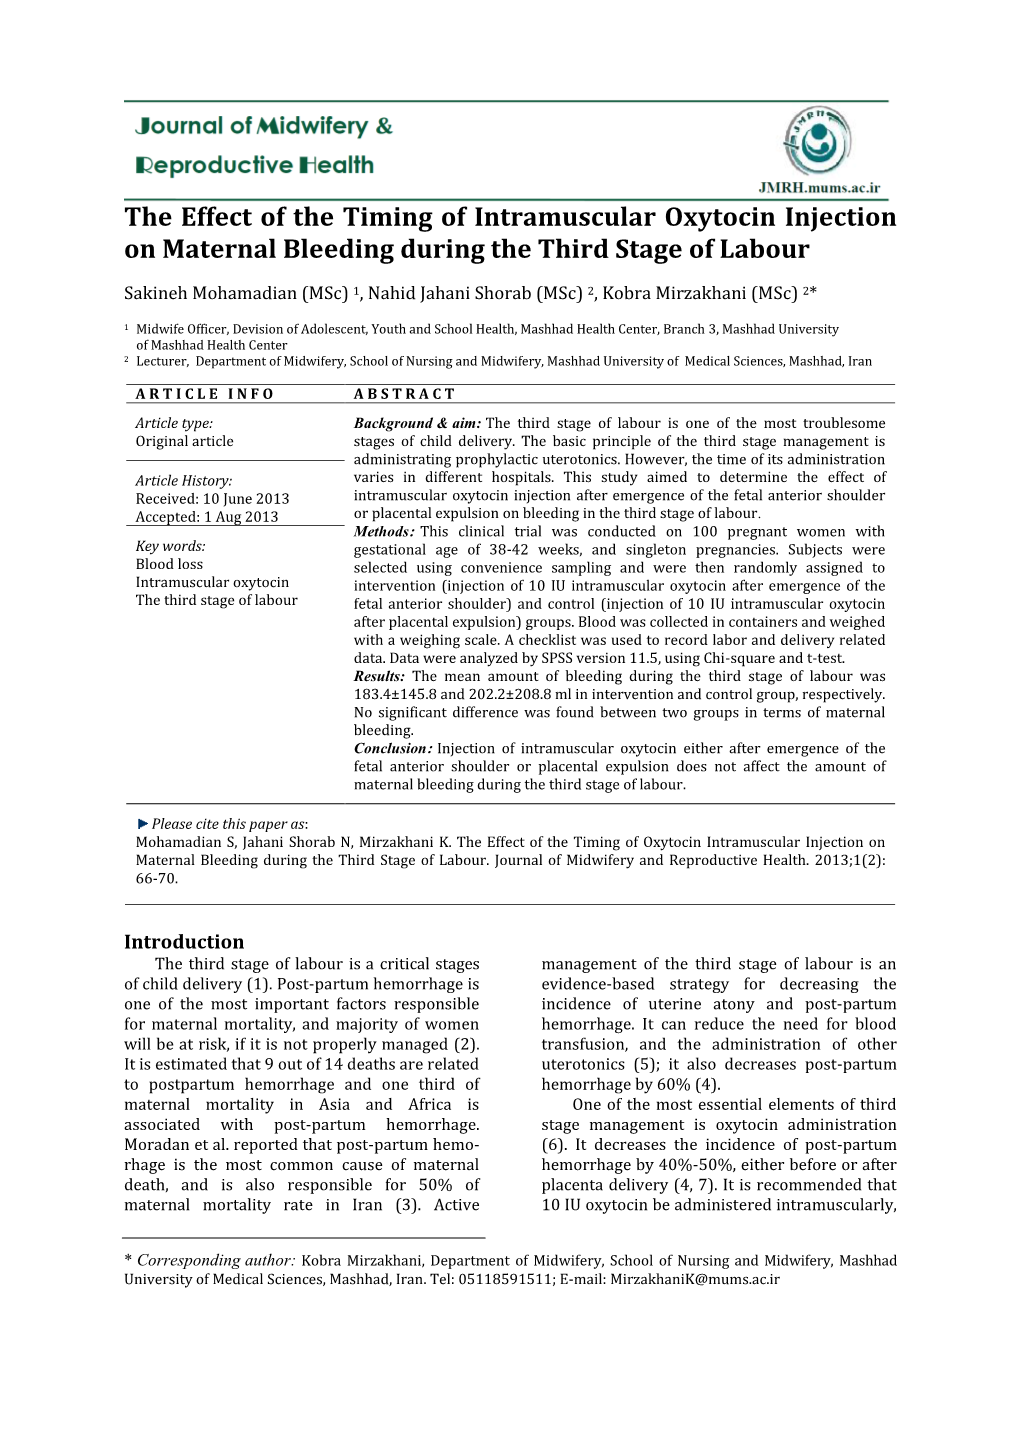 The Effect of the Timing of Intramuscular Oxytocin Injection on Maternal Bleeding During the Third Stage of Labour